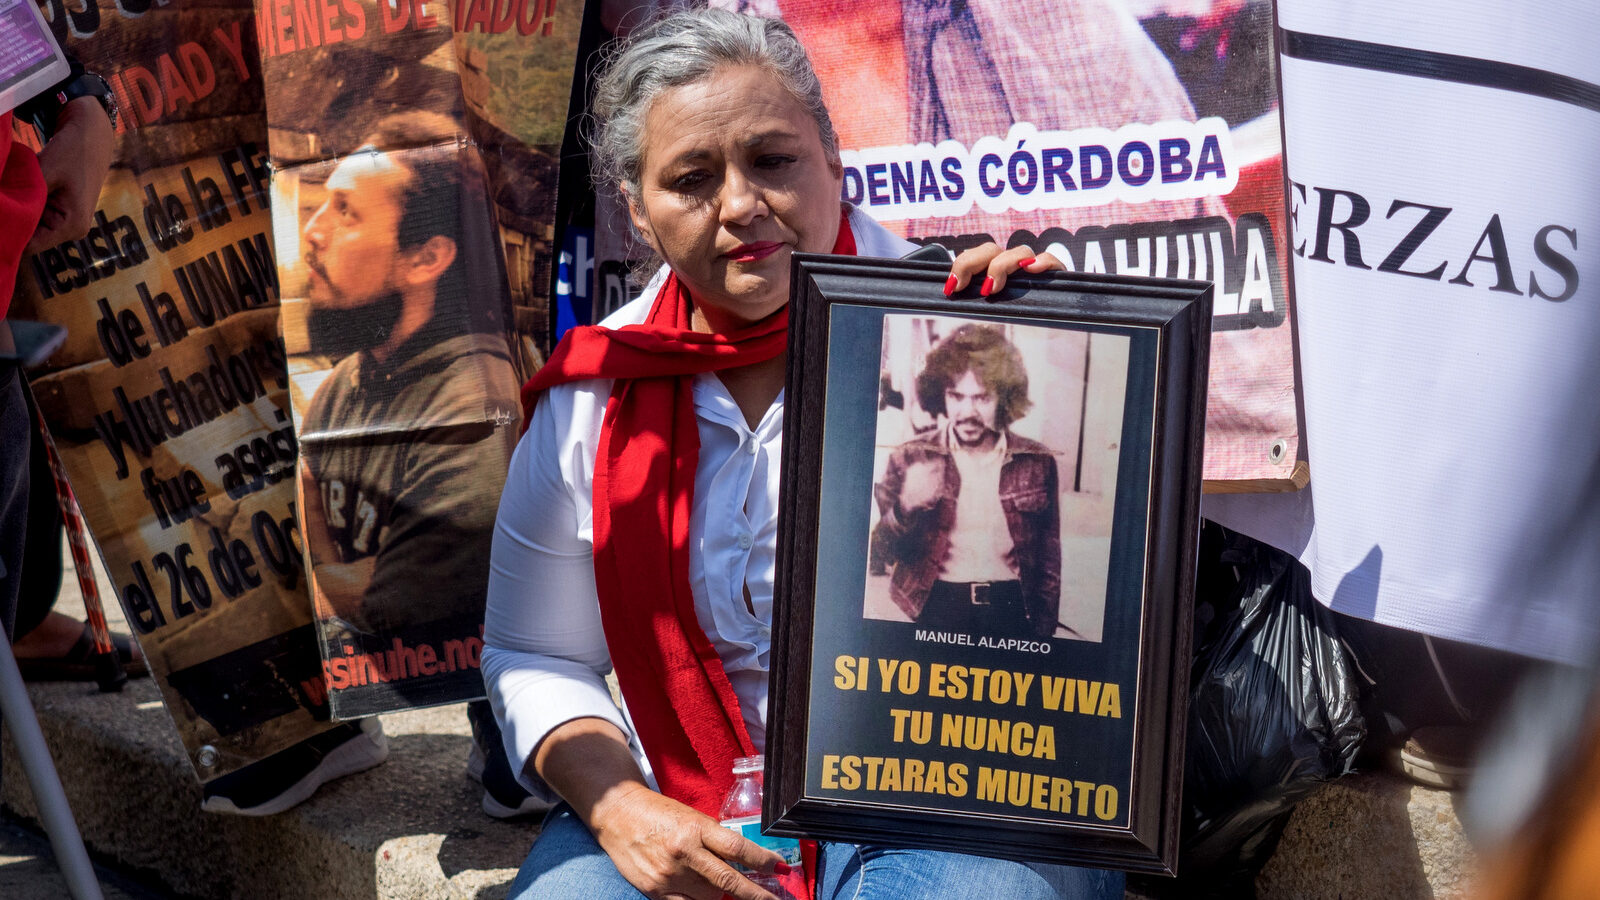 A woman holds an image of her husband who was detained and assassinated by the state during Mexico's dirty war against leftist social activists in the 1970's, the image reads 'As long as I'm alive, you will never be dead', Mexico City, May 10, 2018. (Photo: José Luis Granados Ceja)